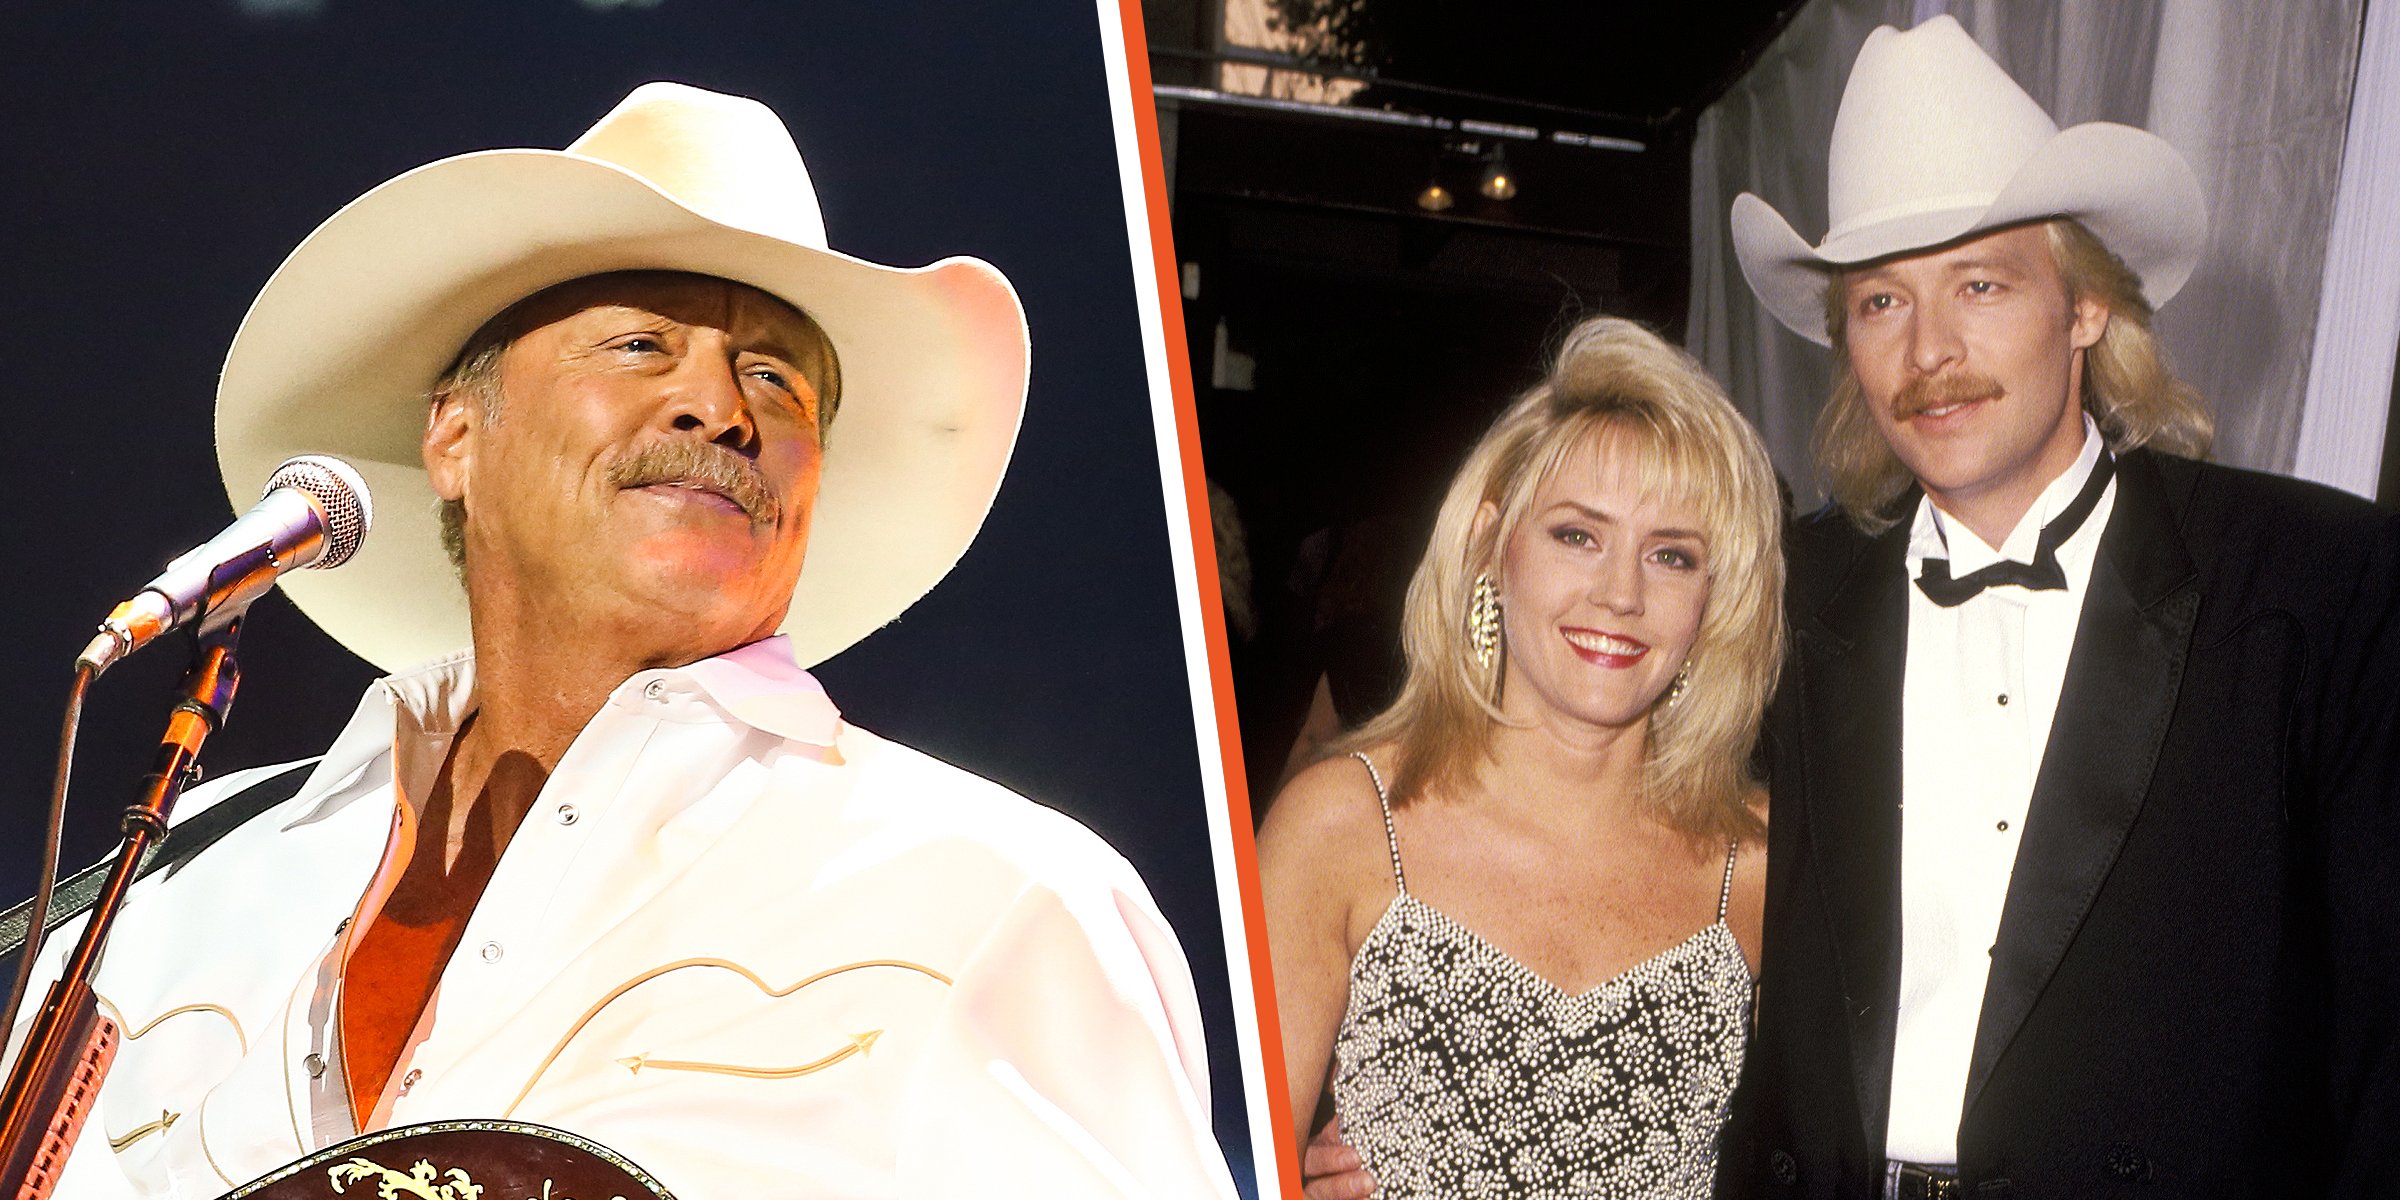 Alan Jackson | Alan Jackson and wife Denise | Source: Getty Images